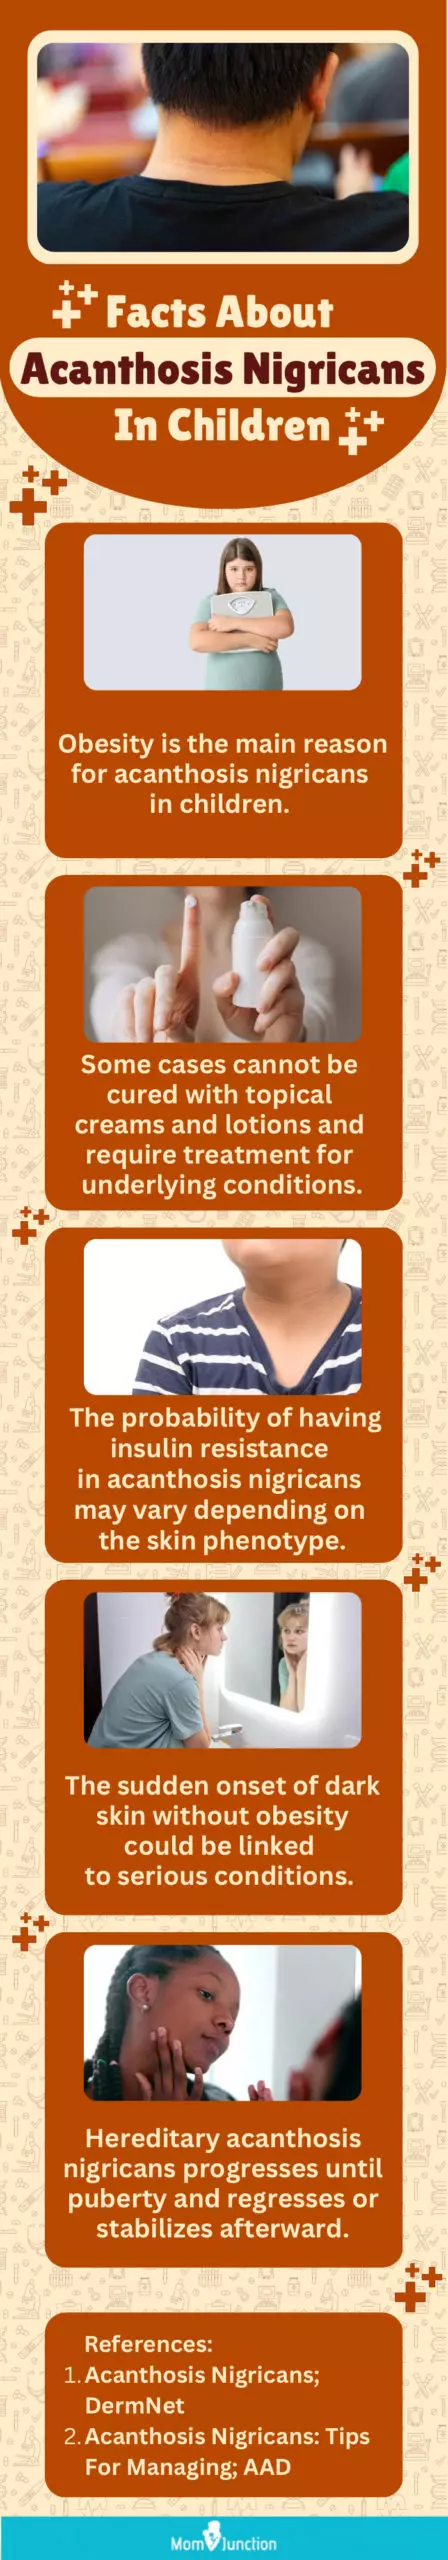 facts about acanthosis nigricans in children (infographic)